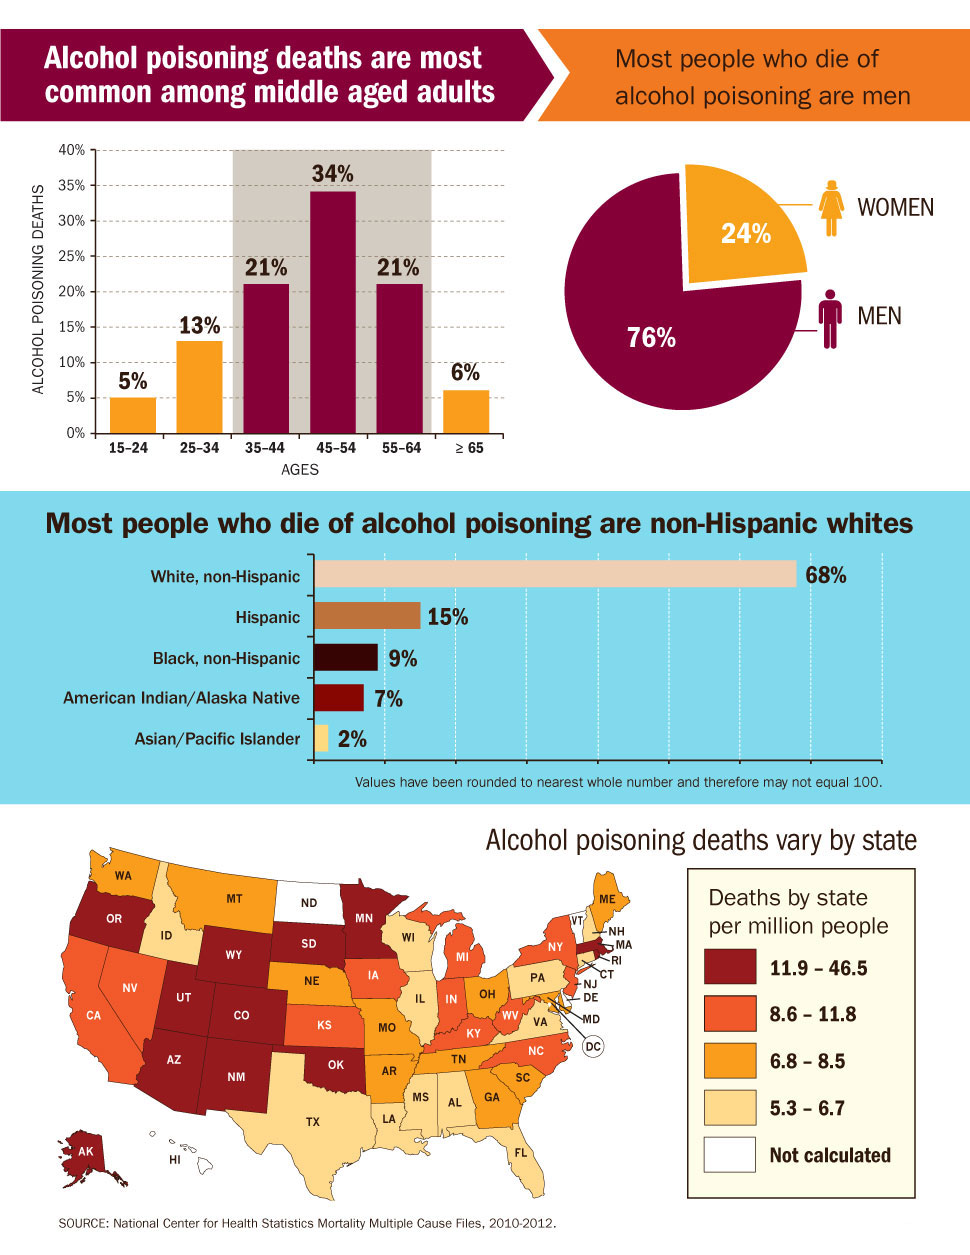 Infographics: “Alcohol poisoning deaths are most common among middle aged adults”, “Most people who die of alcohol poisoning are non-Hispanic whites”,  and “Alcohol poisoning deaths vary by state.”